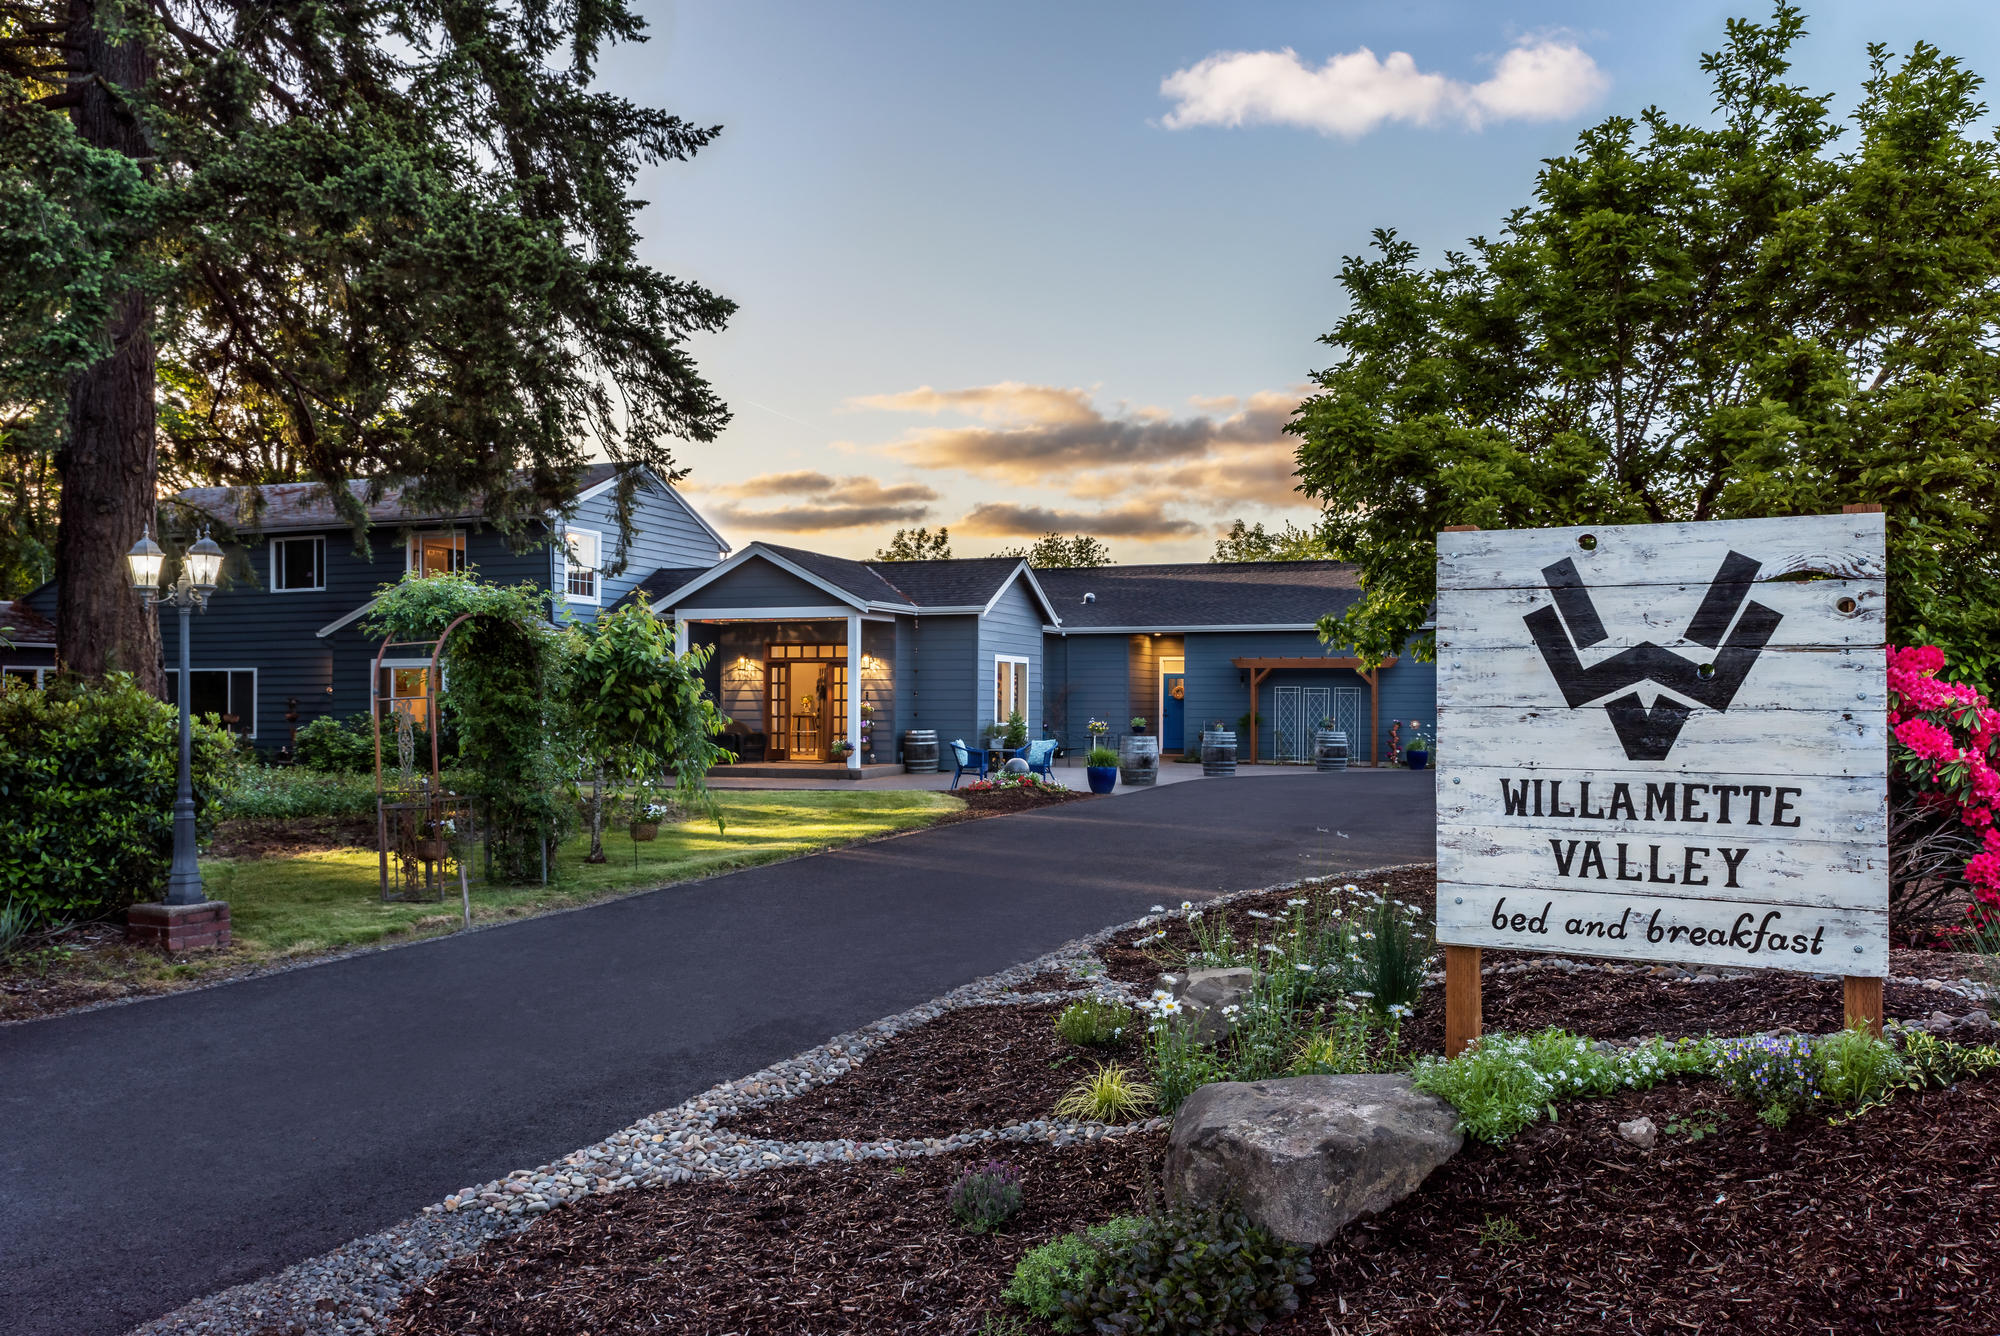 The Willamette Valley Bed and Breakfast sign and building.